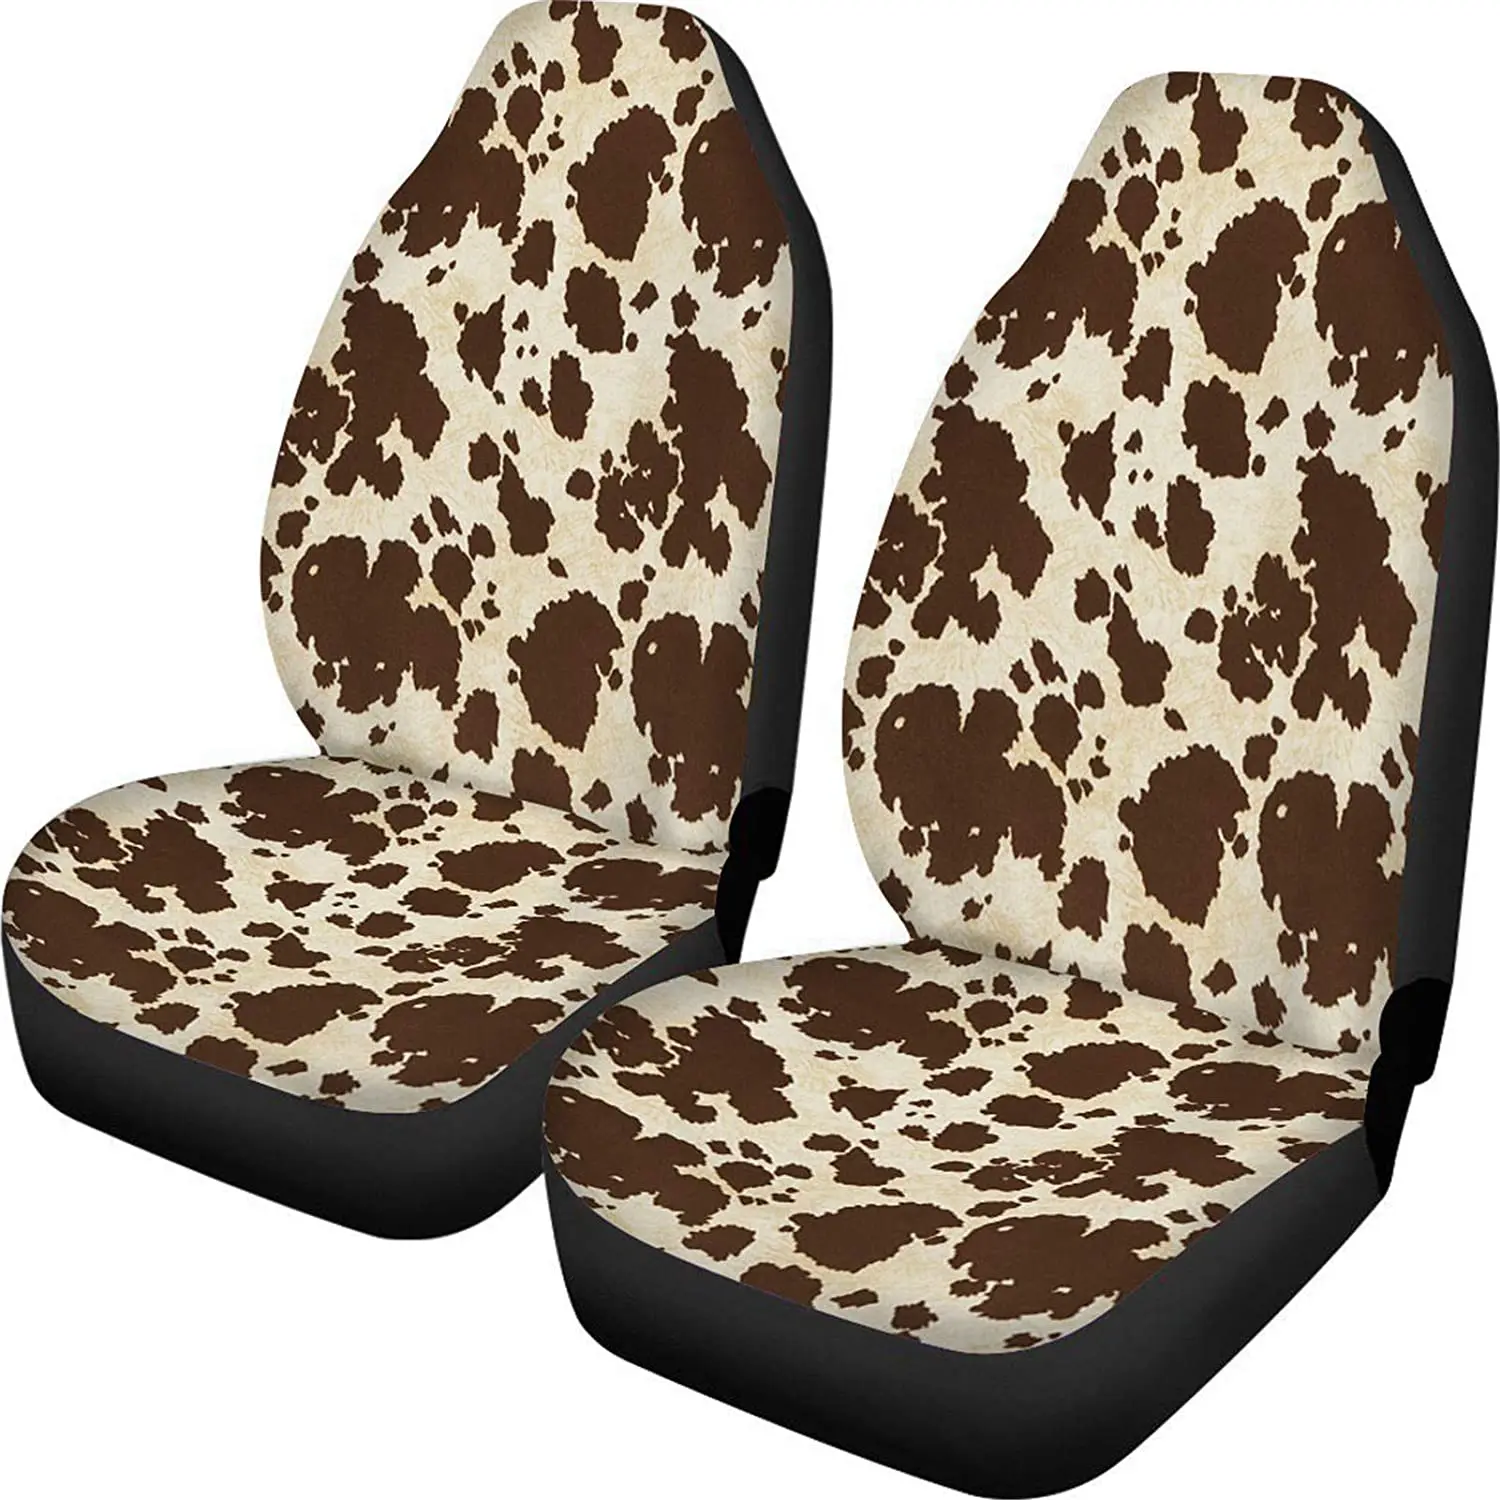 

Brown Cow Print Car Seat Covers Vintage Print Car Front Bucket Seat Cover Auto Accessories Universal Fits for Most Cars 2PCS